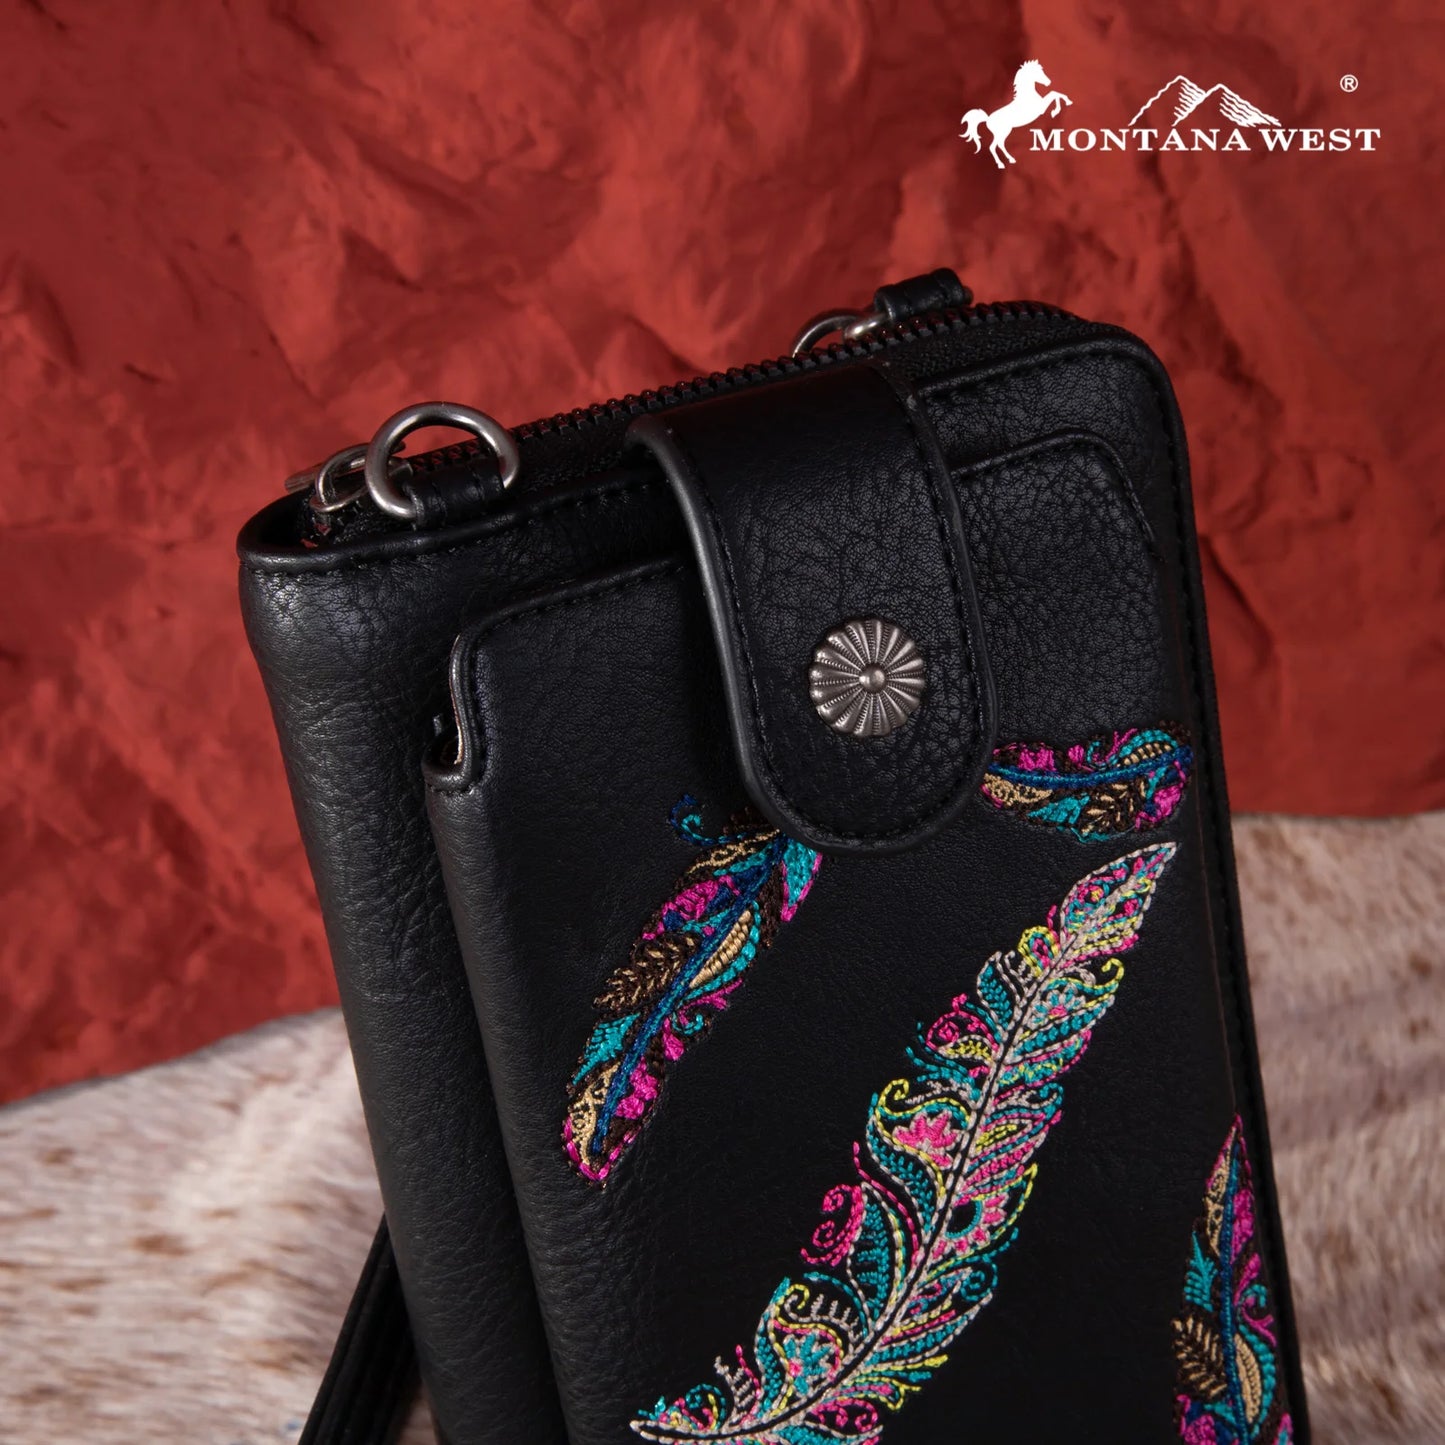 Montana West Embroidered Collection Phone Wallet/crossbody Black